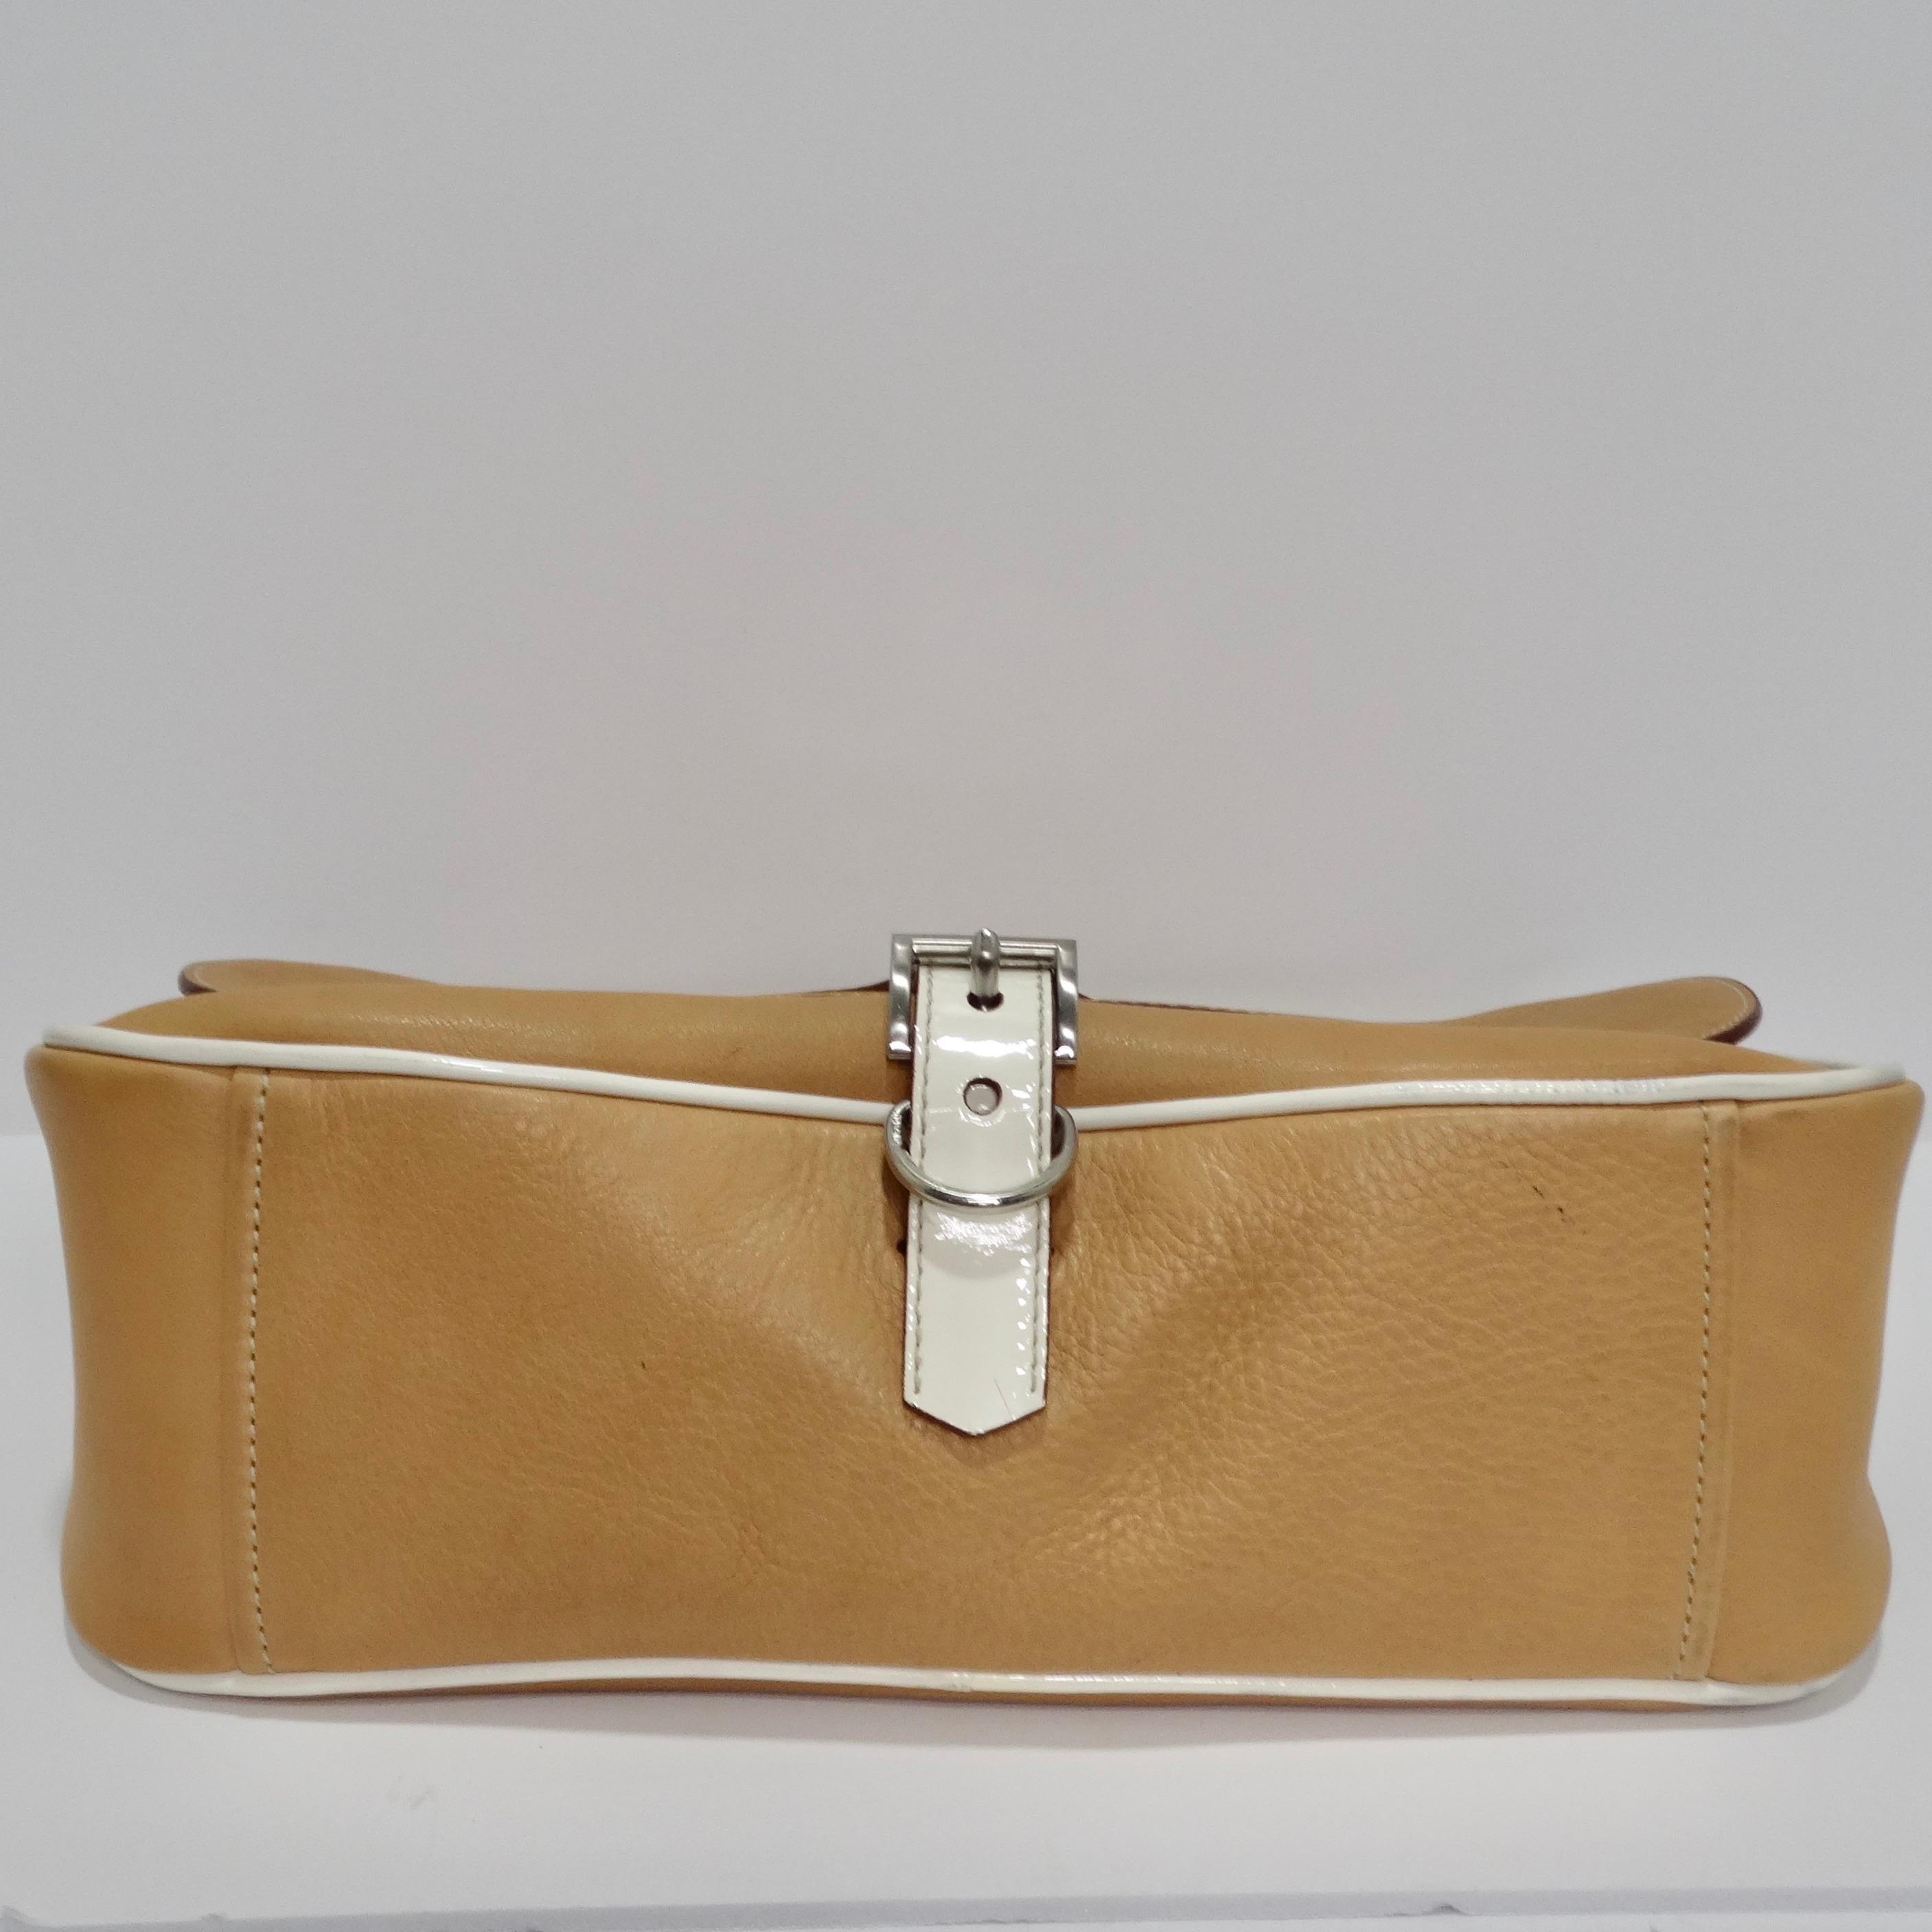 Prada 2000s Camel Leather Top Handle Bag For Sale 2